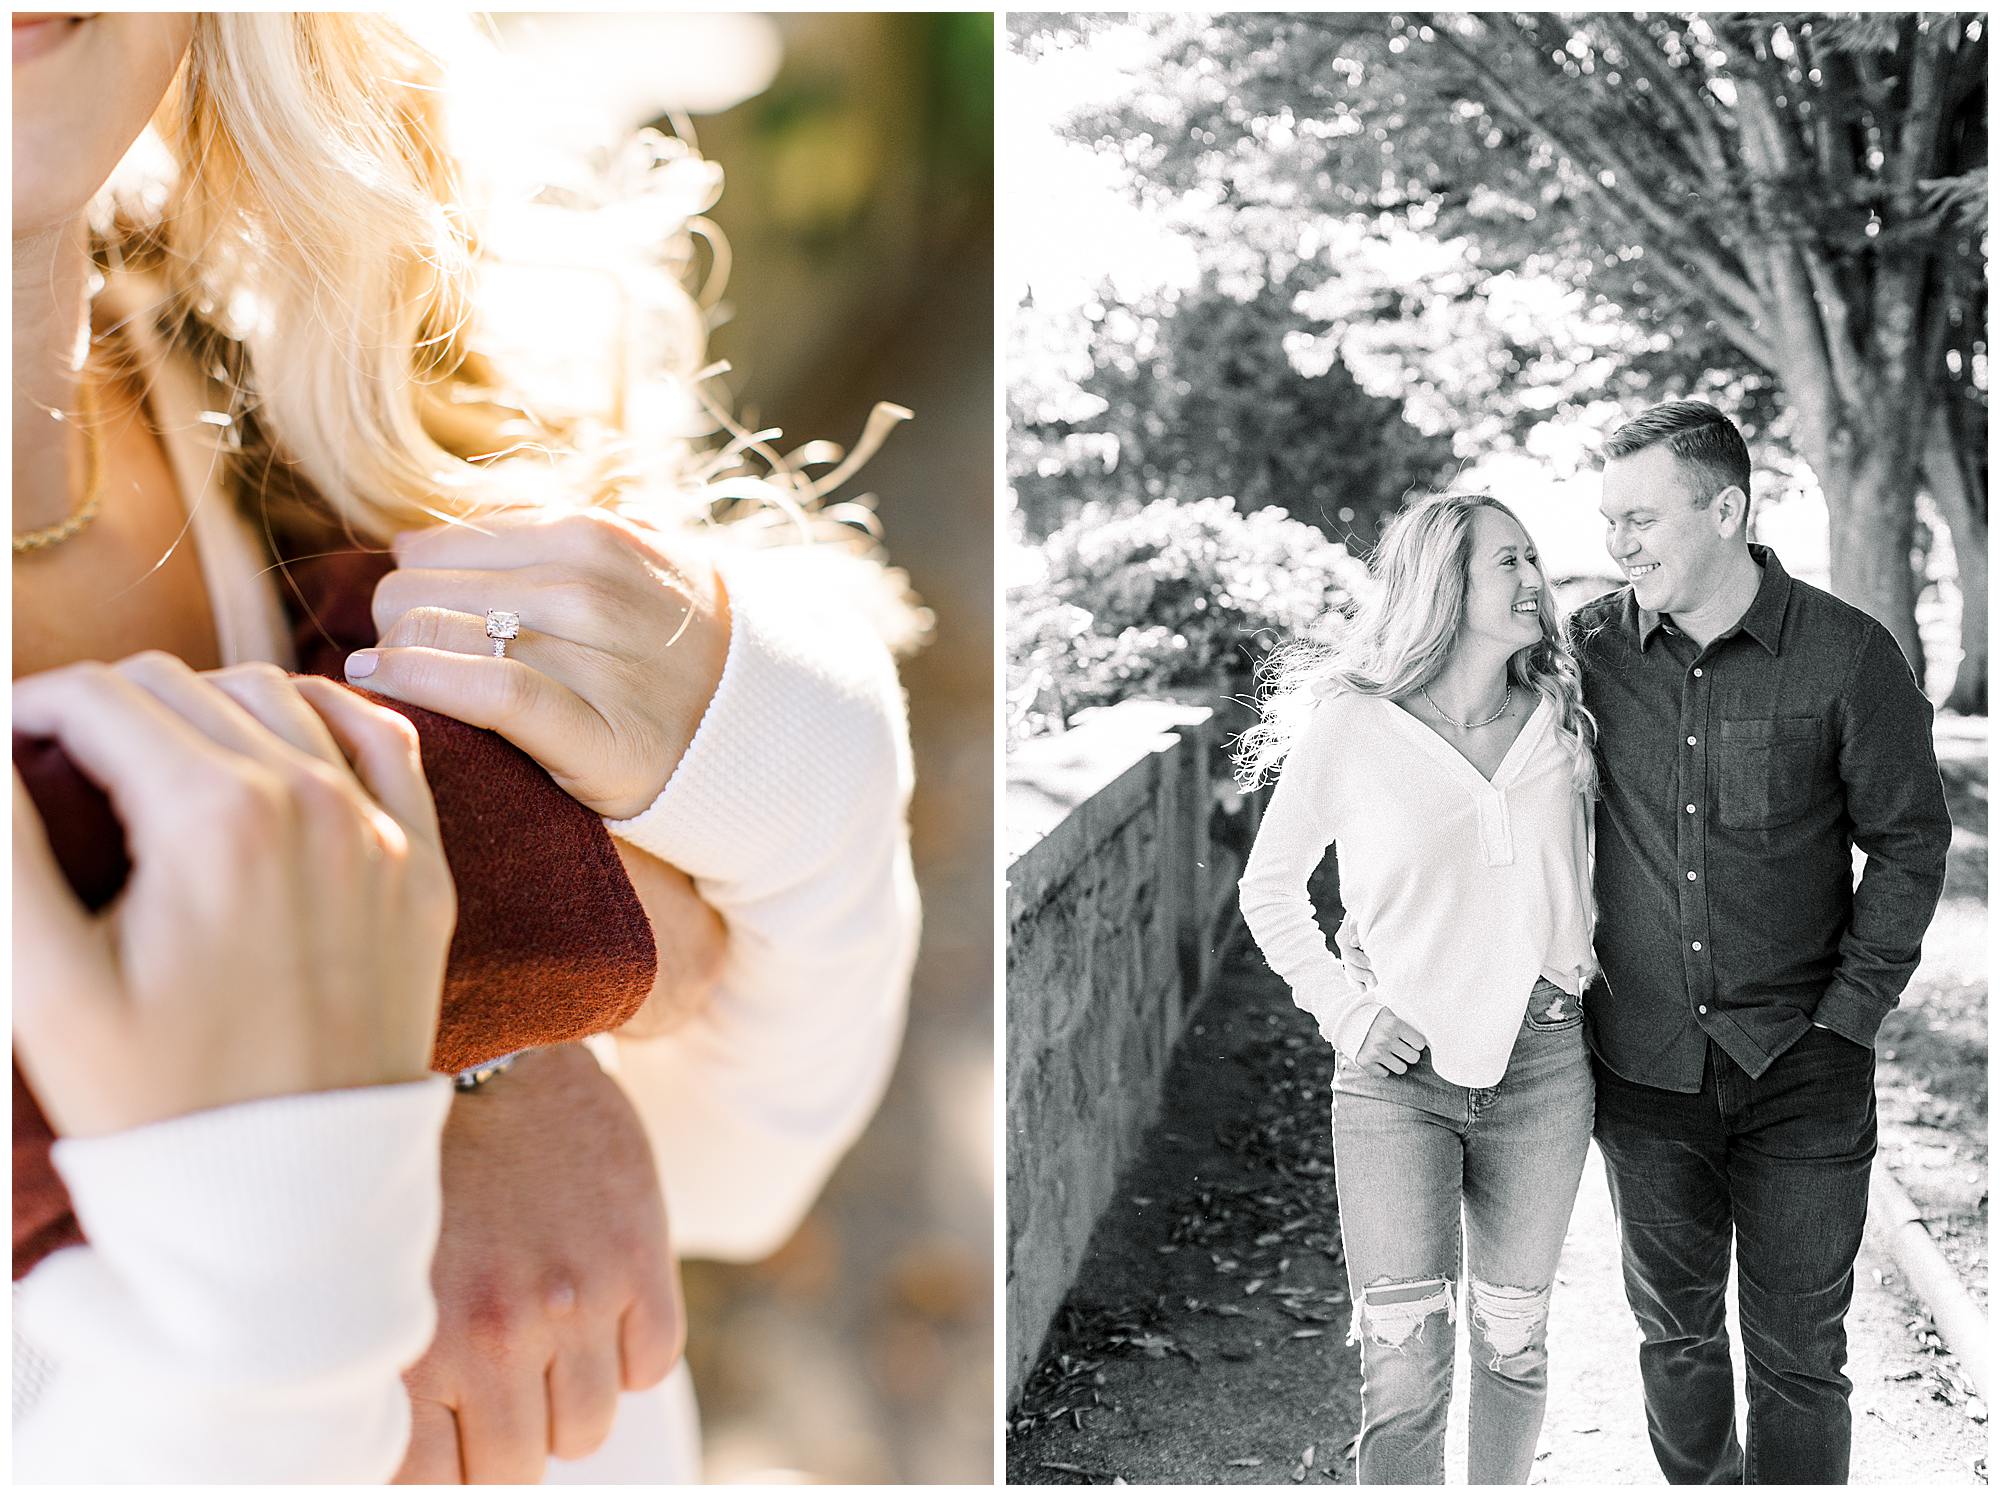 A Dreamy October Engagement at Harkness Park